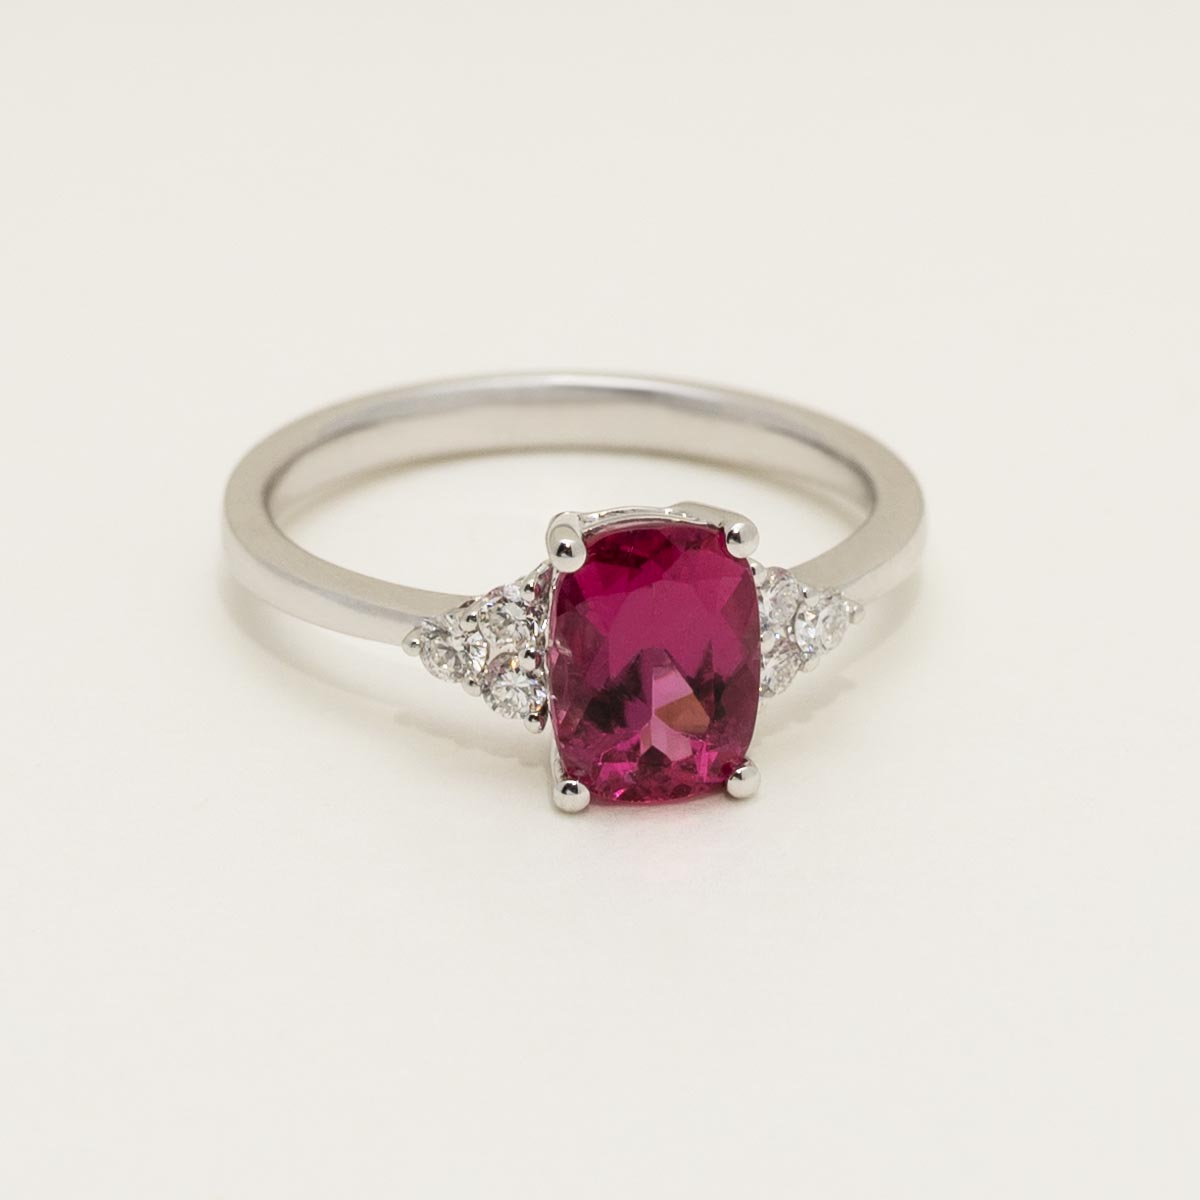 Cushion Cut Pink Tourmaline Ring in 18kt White Gold with Diamonds (1/7ct tw)